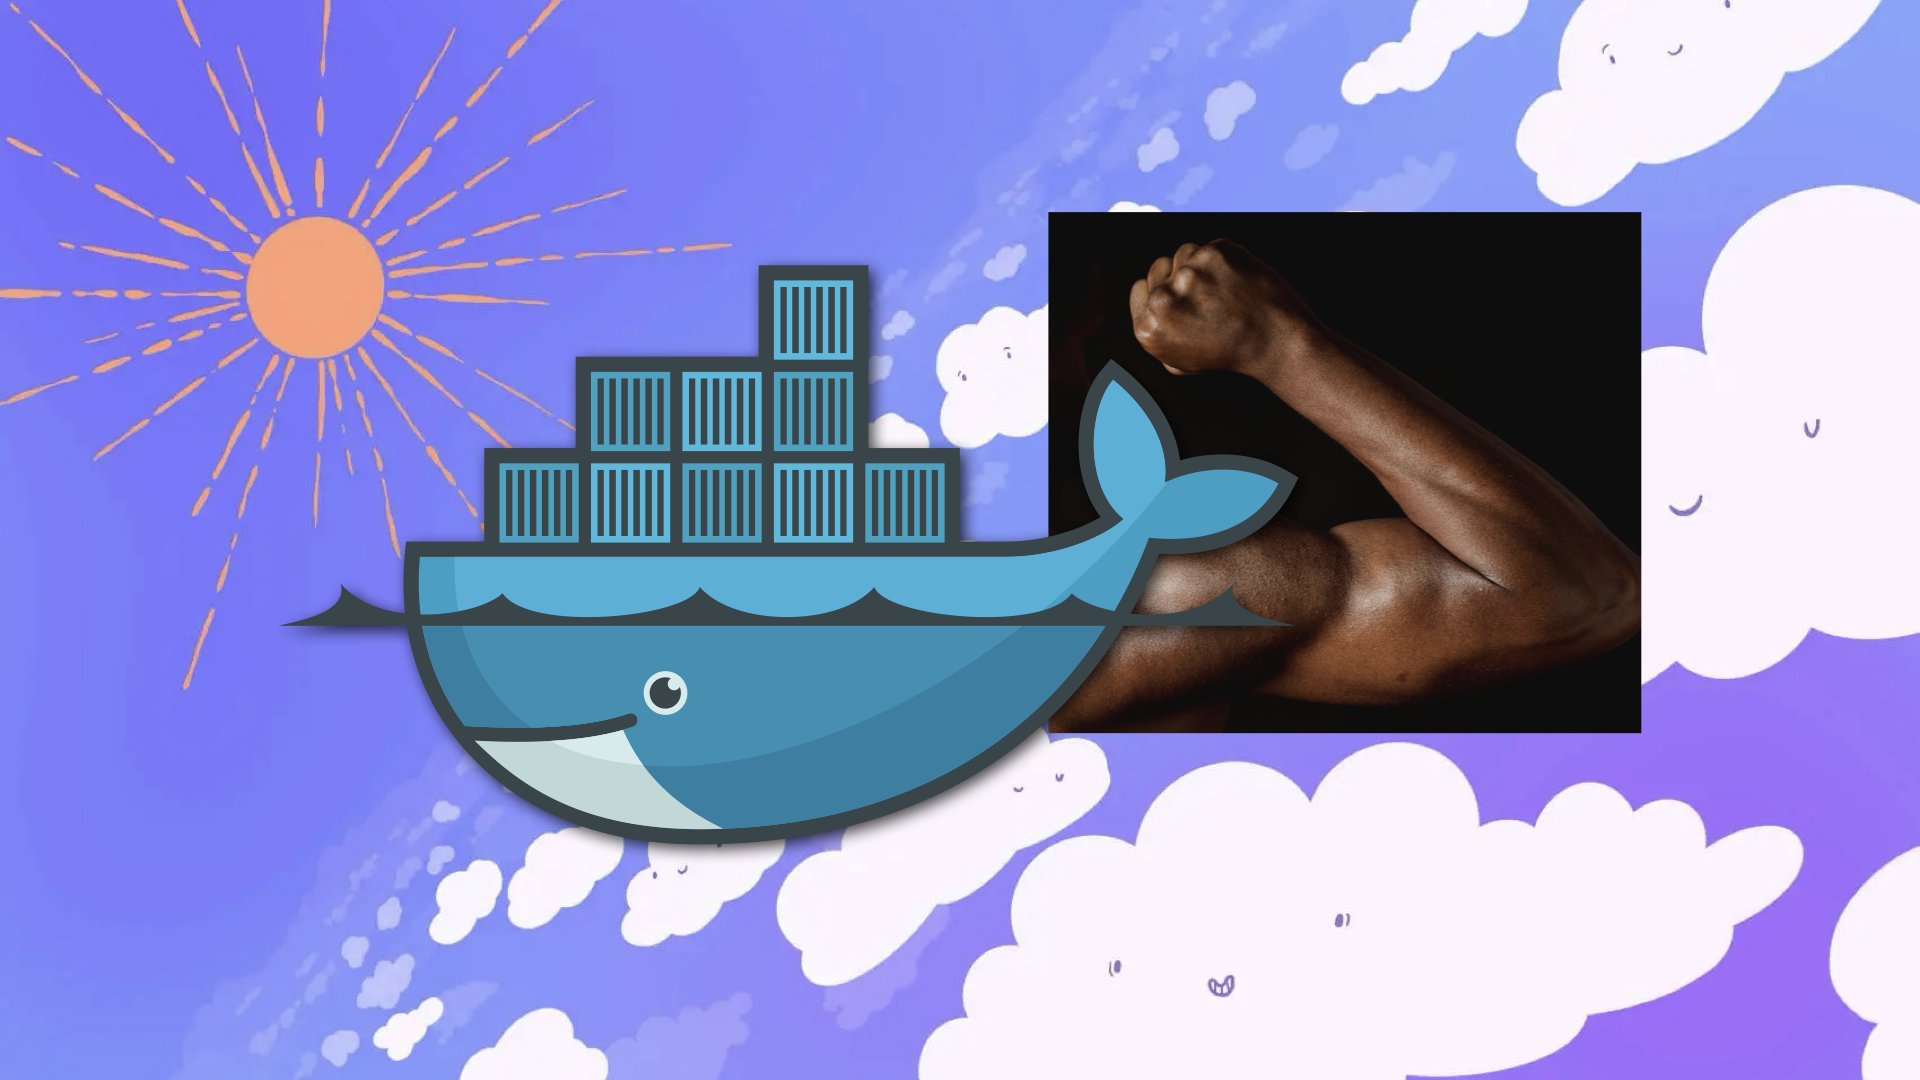 The docker logo with a badly photoshopped muscle-bound beefy arm on a sky background.